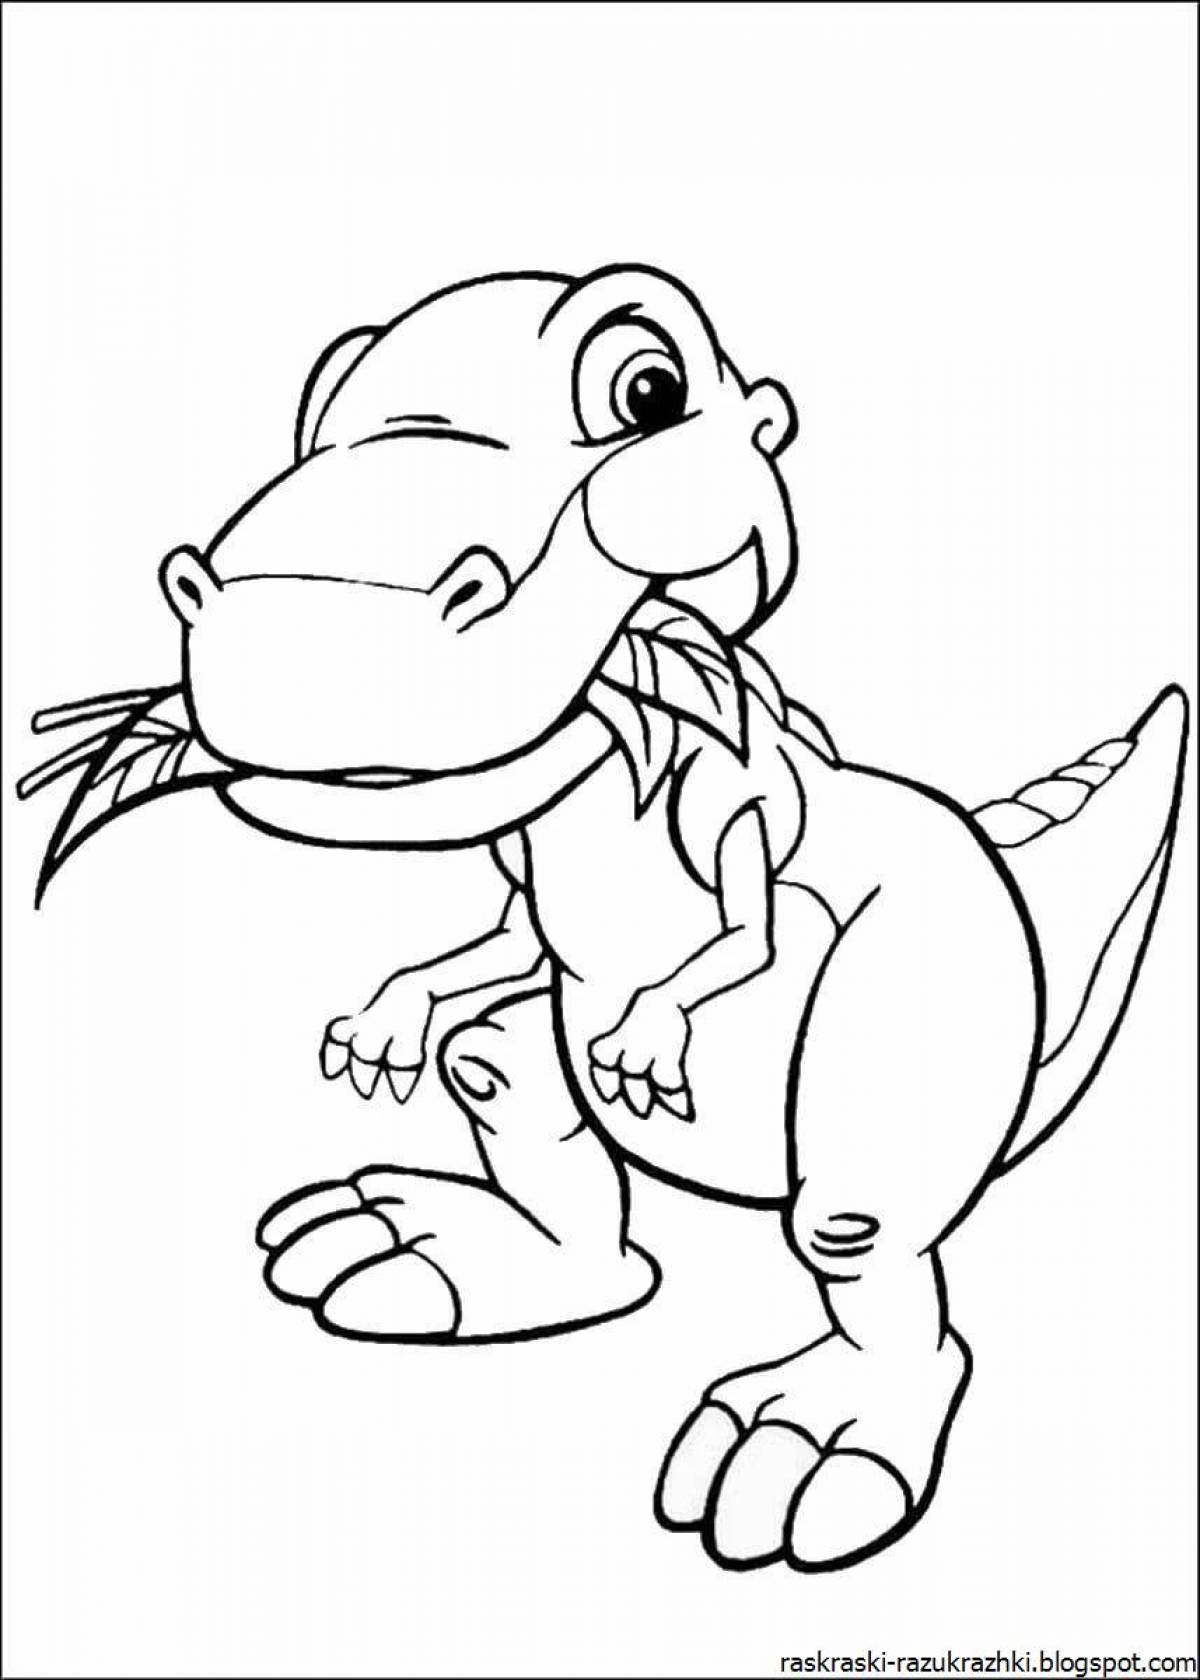 Intense coloring for kids dinosaurs 3-4 years old